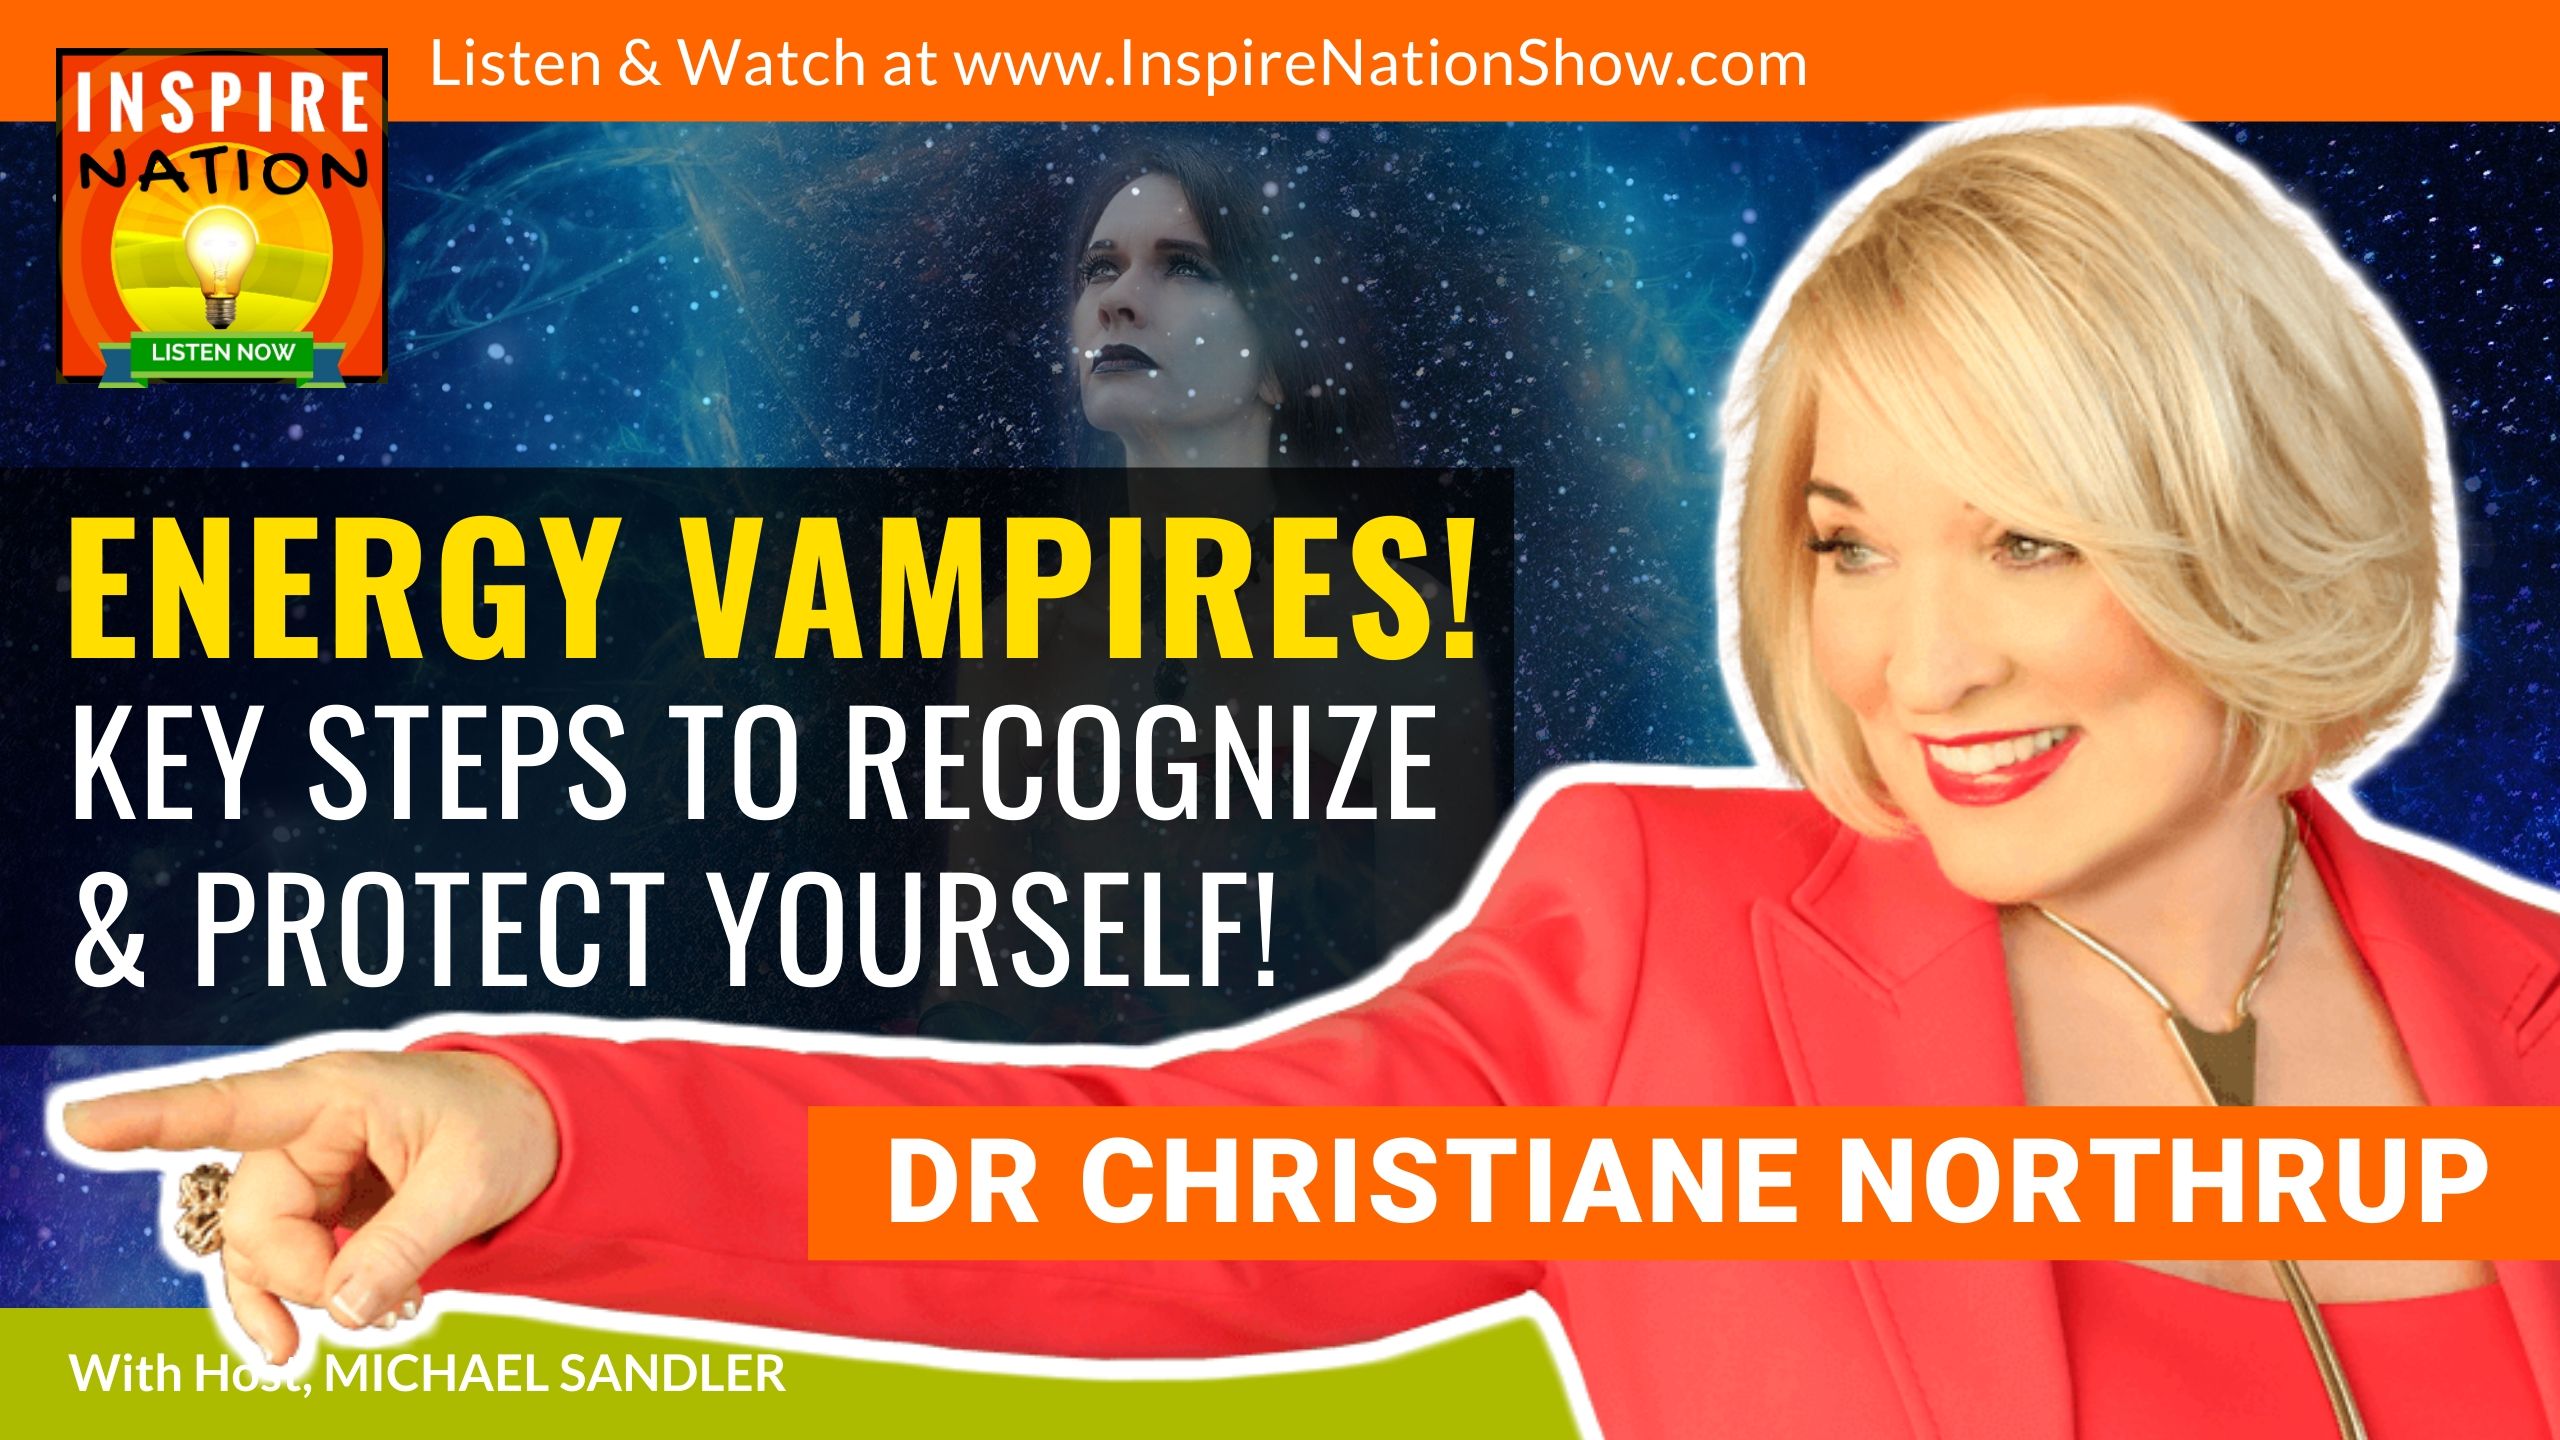 Micheal Sandler interviews Dr Christiane Northrup on energy vampires and how to protect yourself from them!